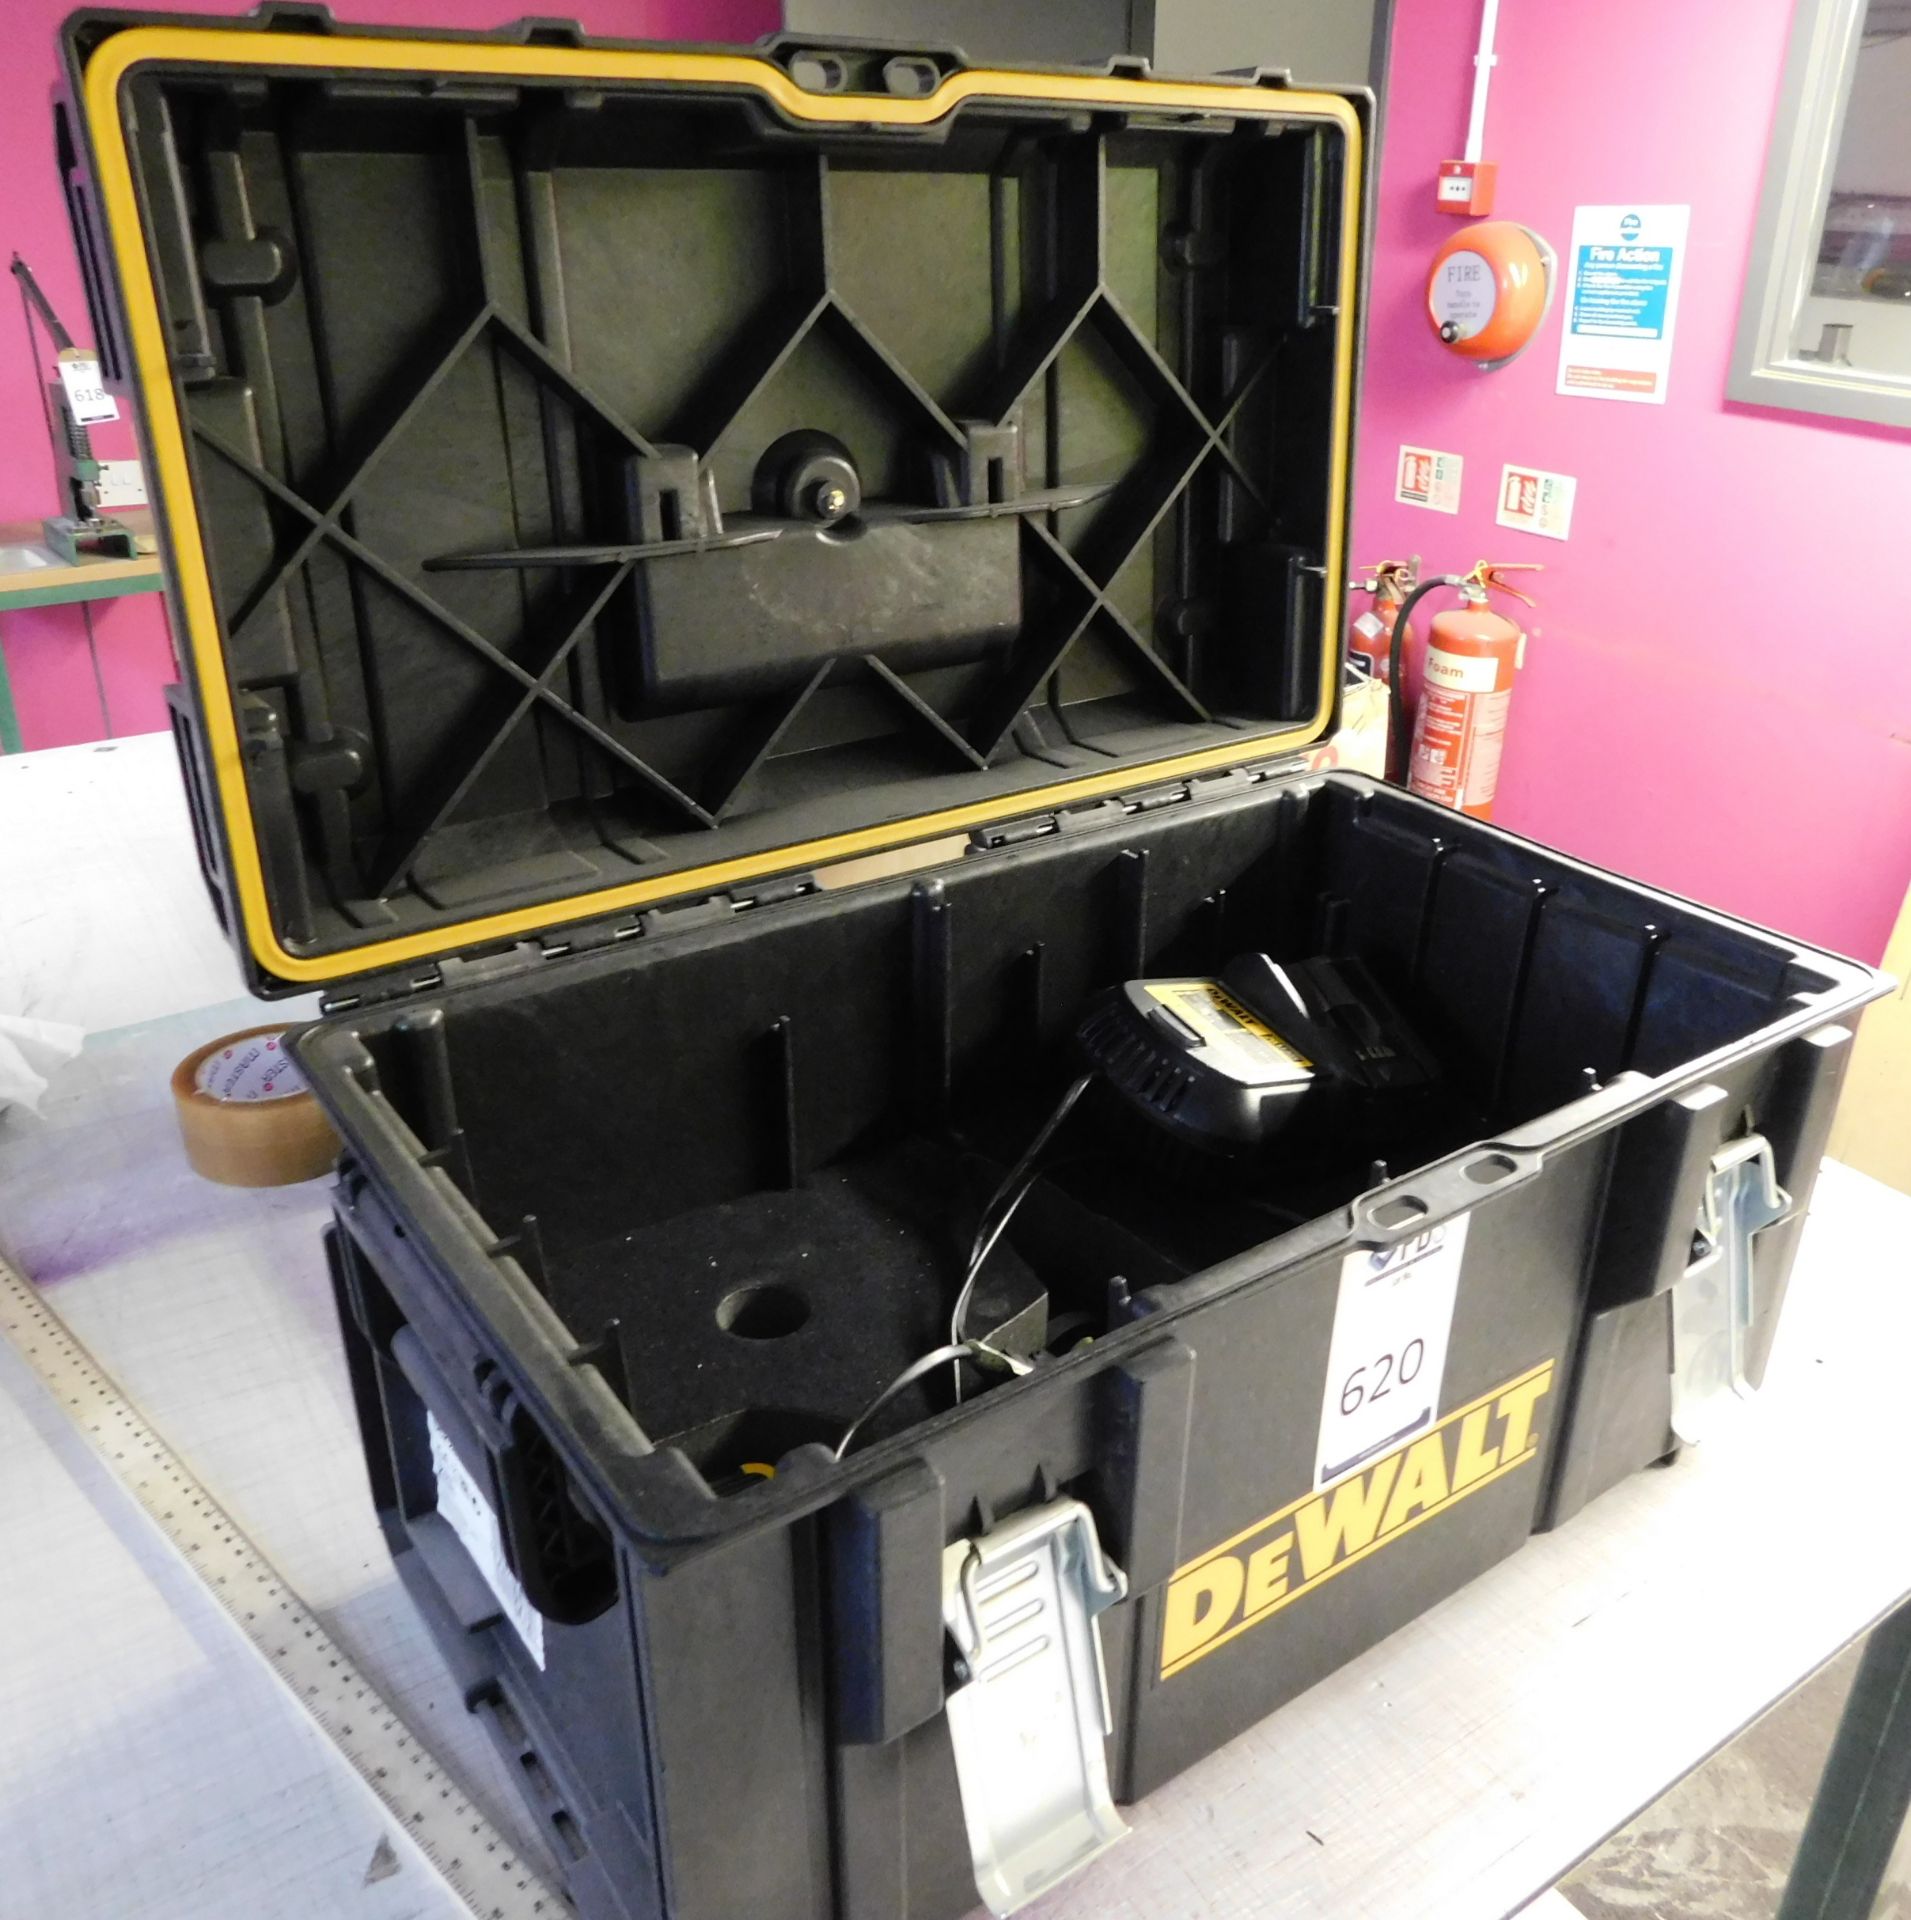 DeWalt 18v Cordless Drill, 2 Batteries, Charger & Carry Case (on mezzanine) (Location Rochdale. - Image 7 of 8